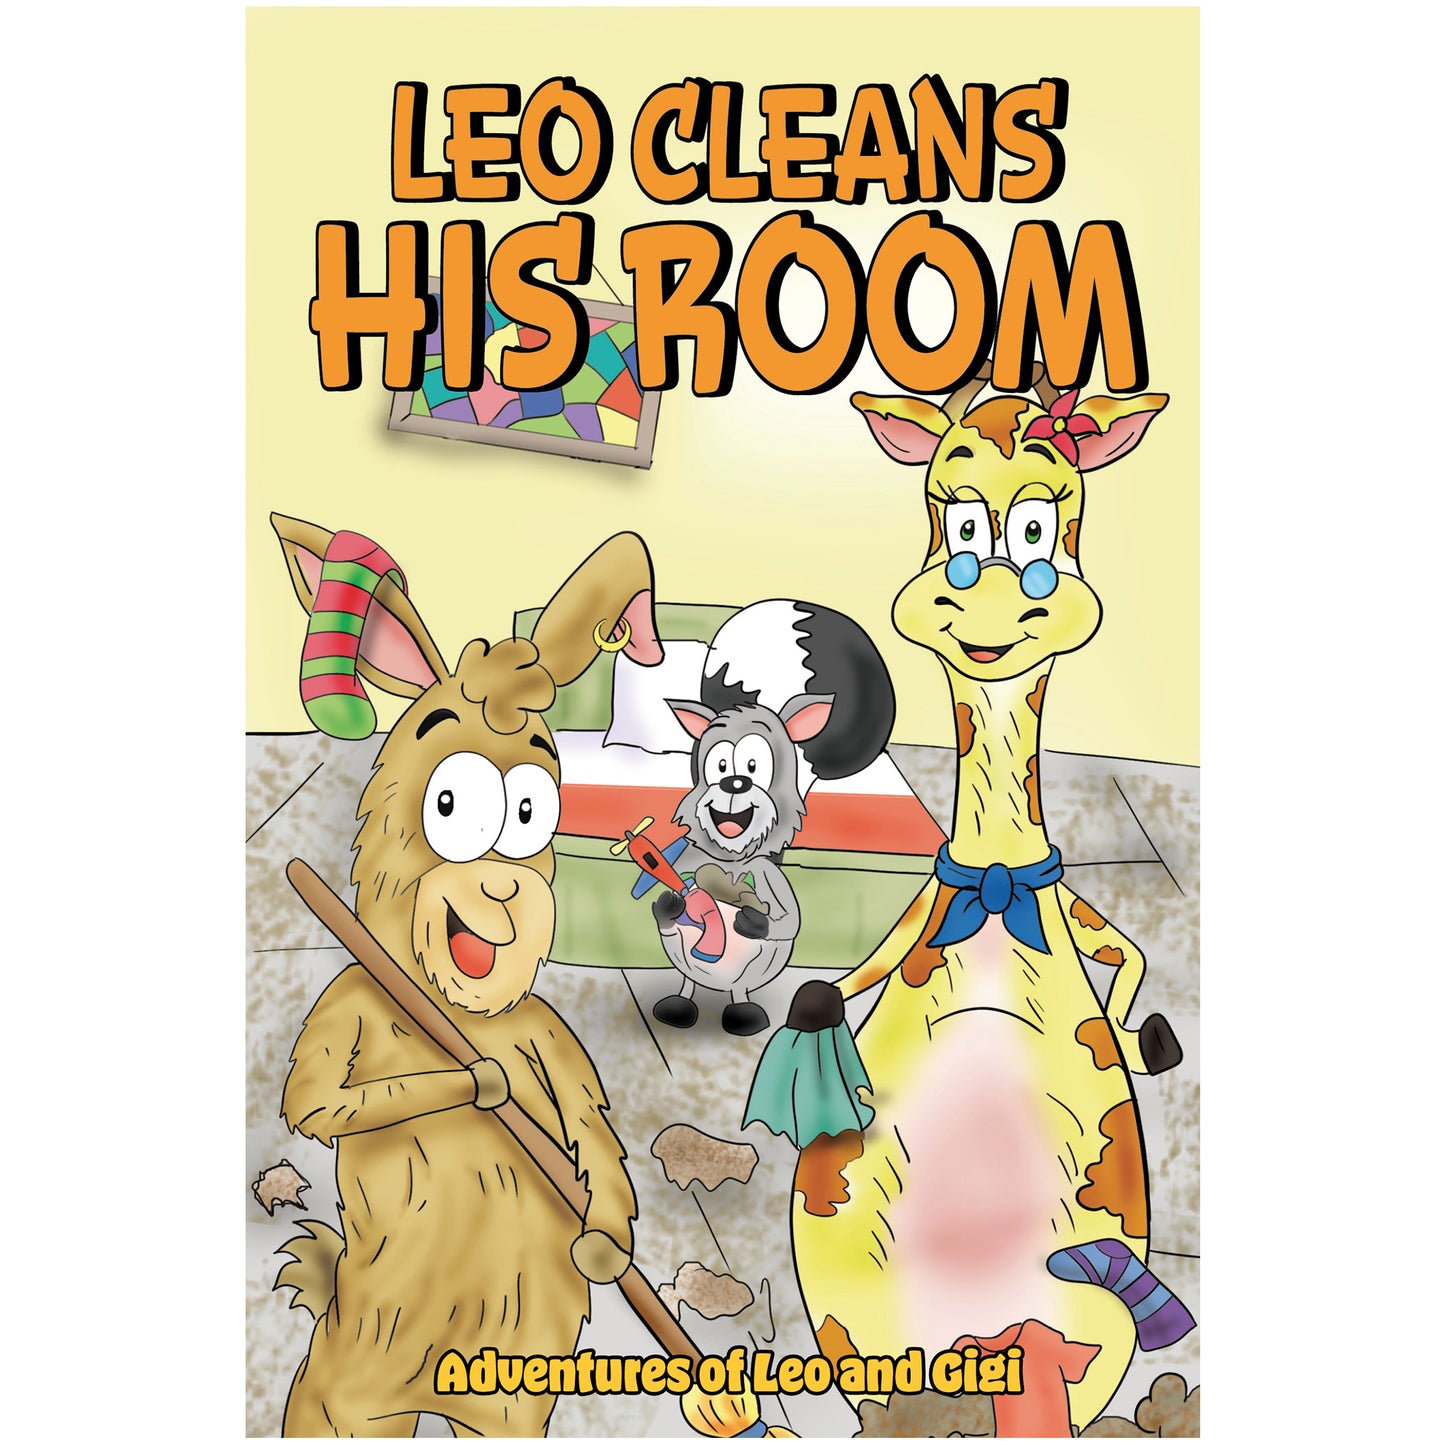 Leo Cleans His Room